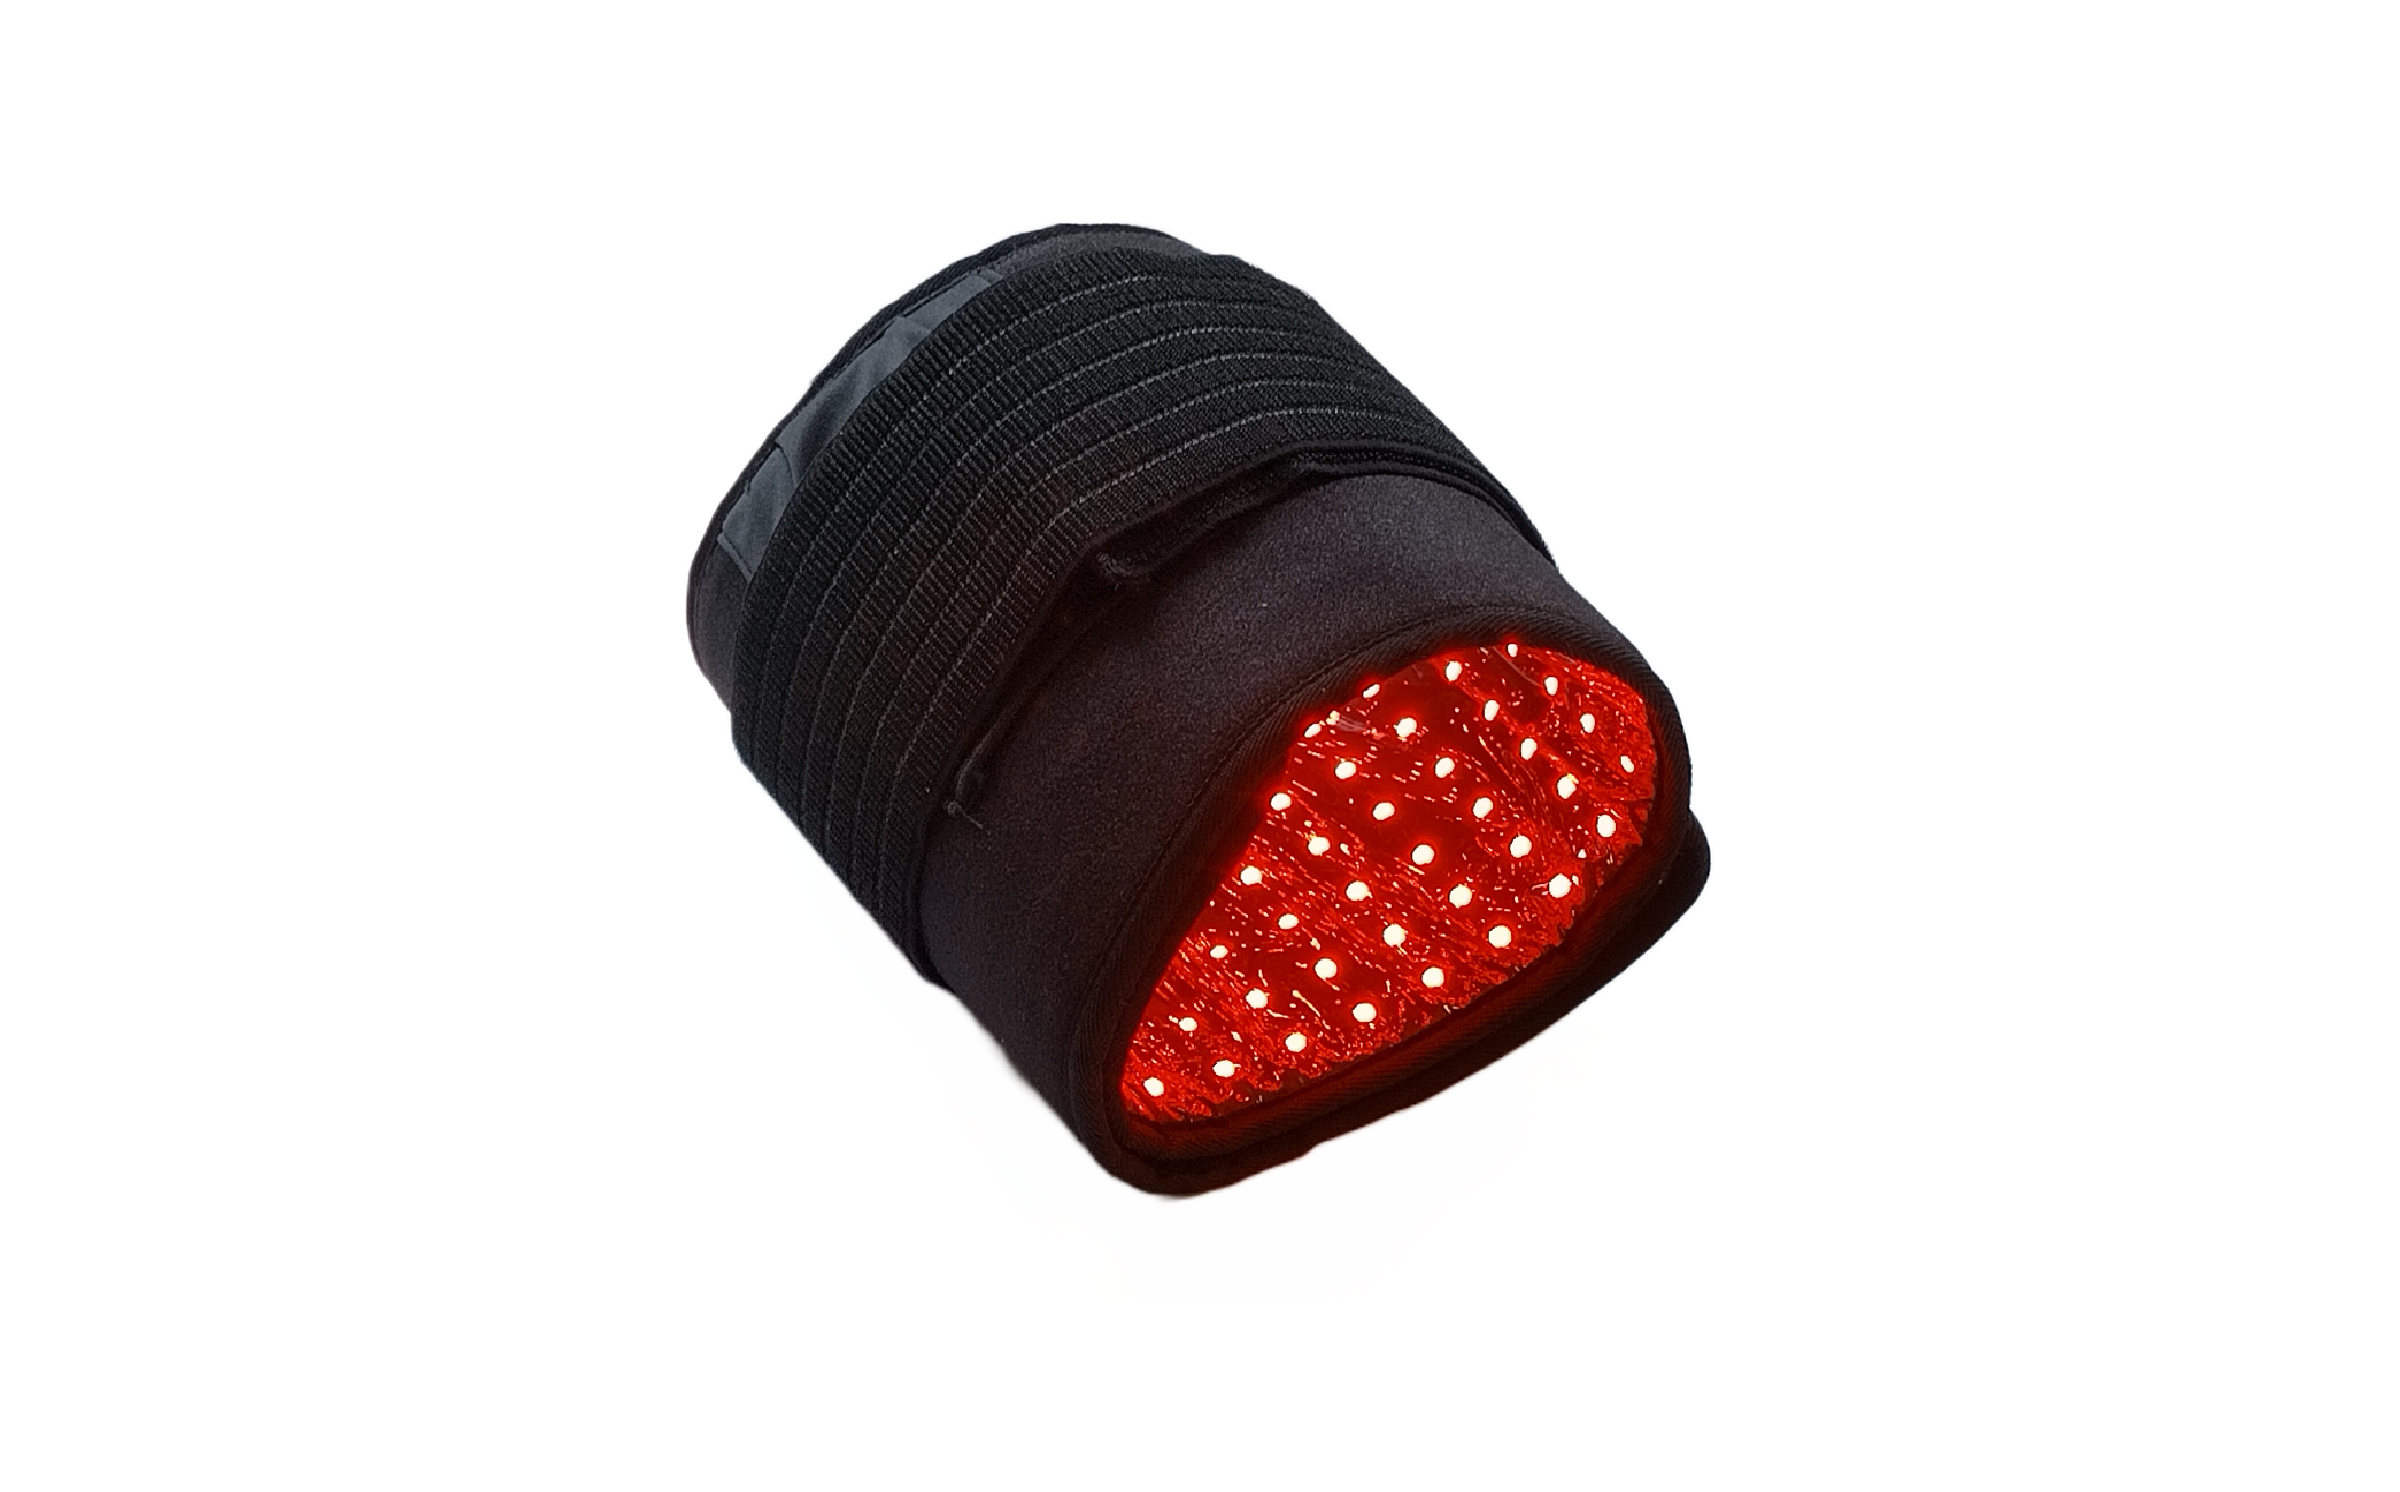 Light therapy flex pad for wound healing, reduction of pain and inflammation